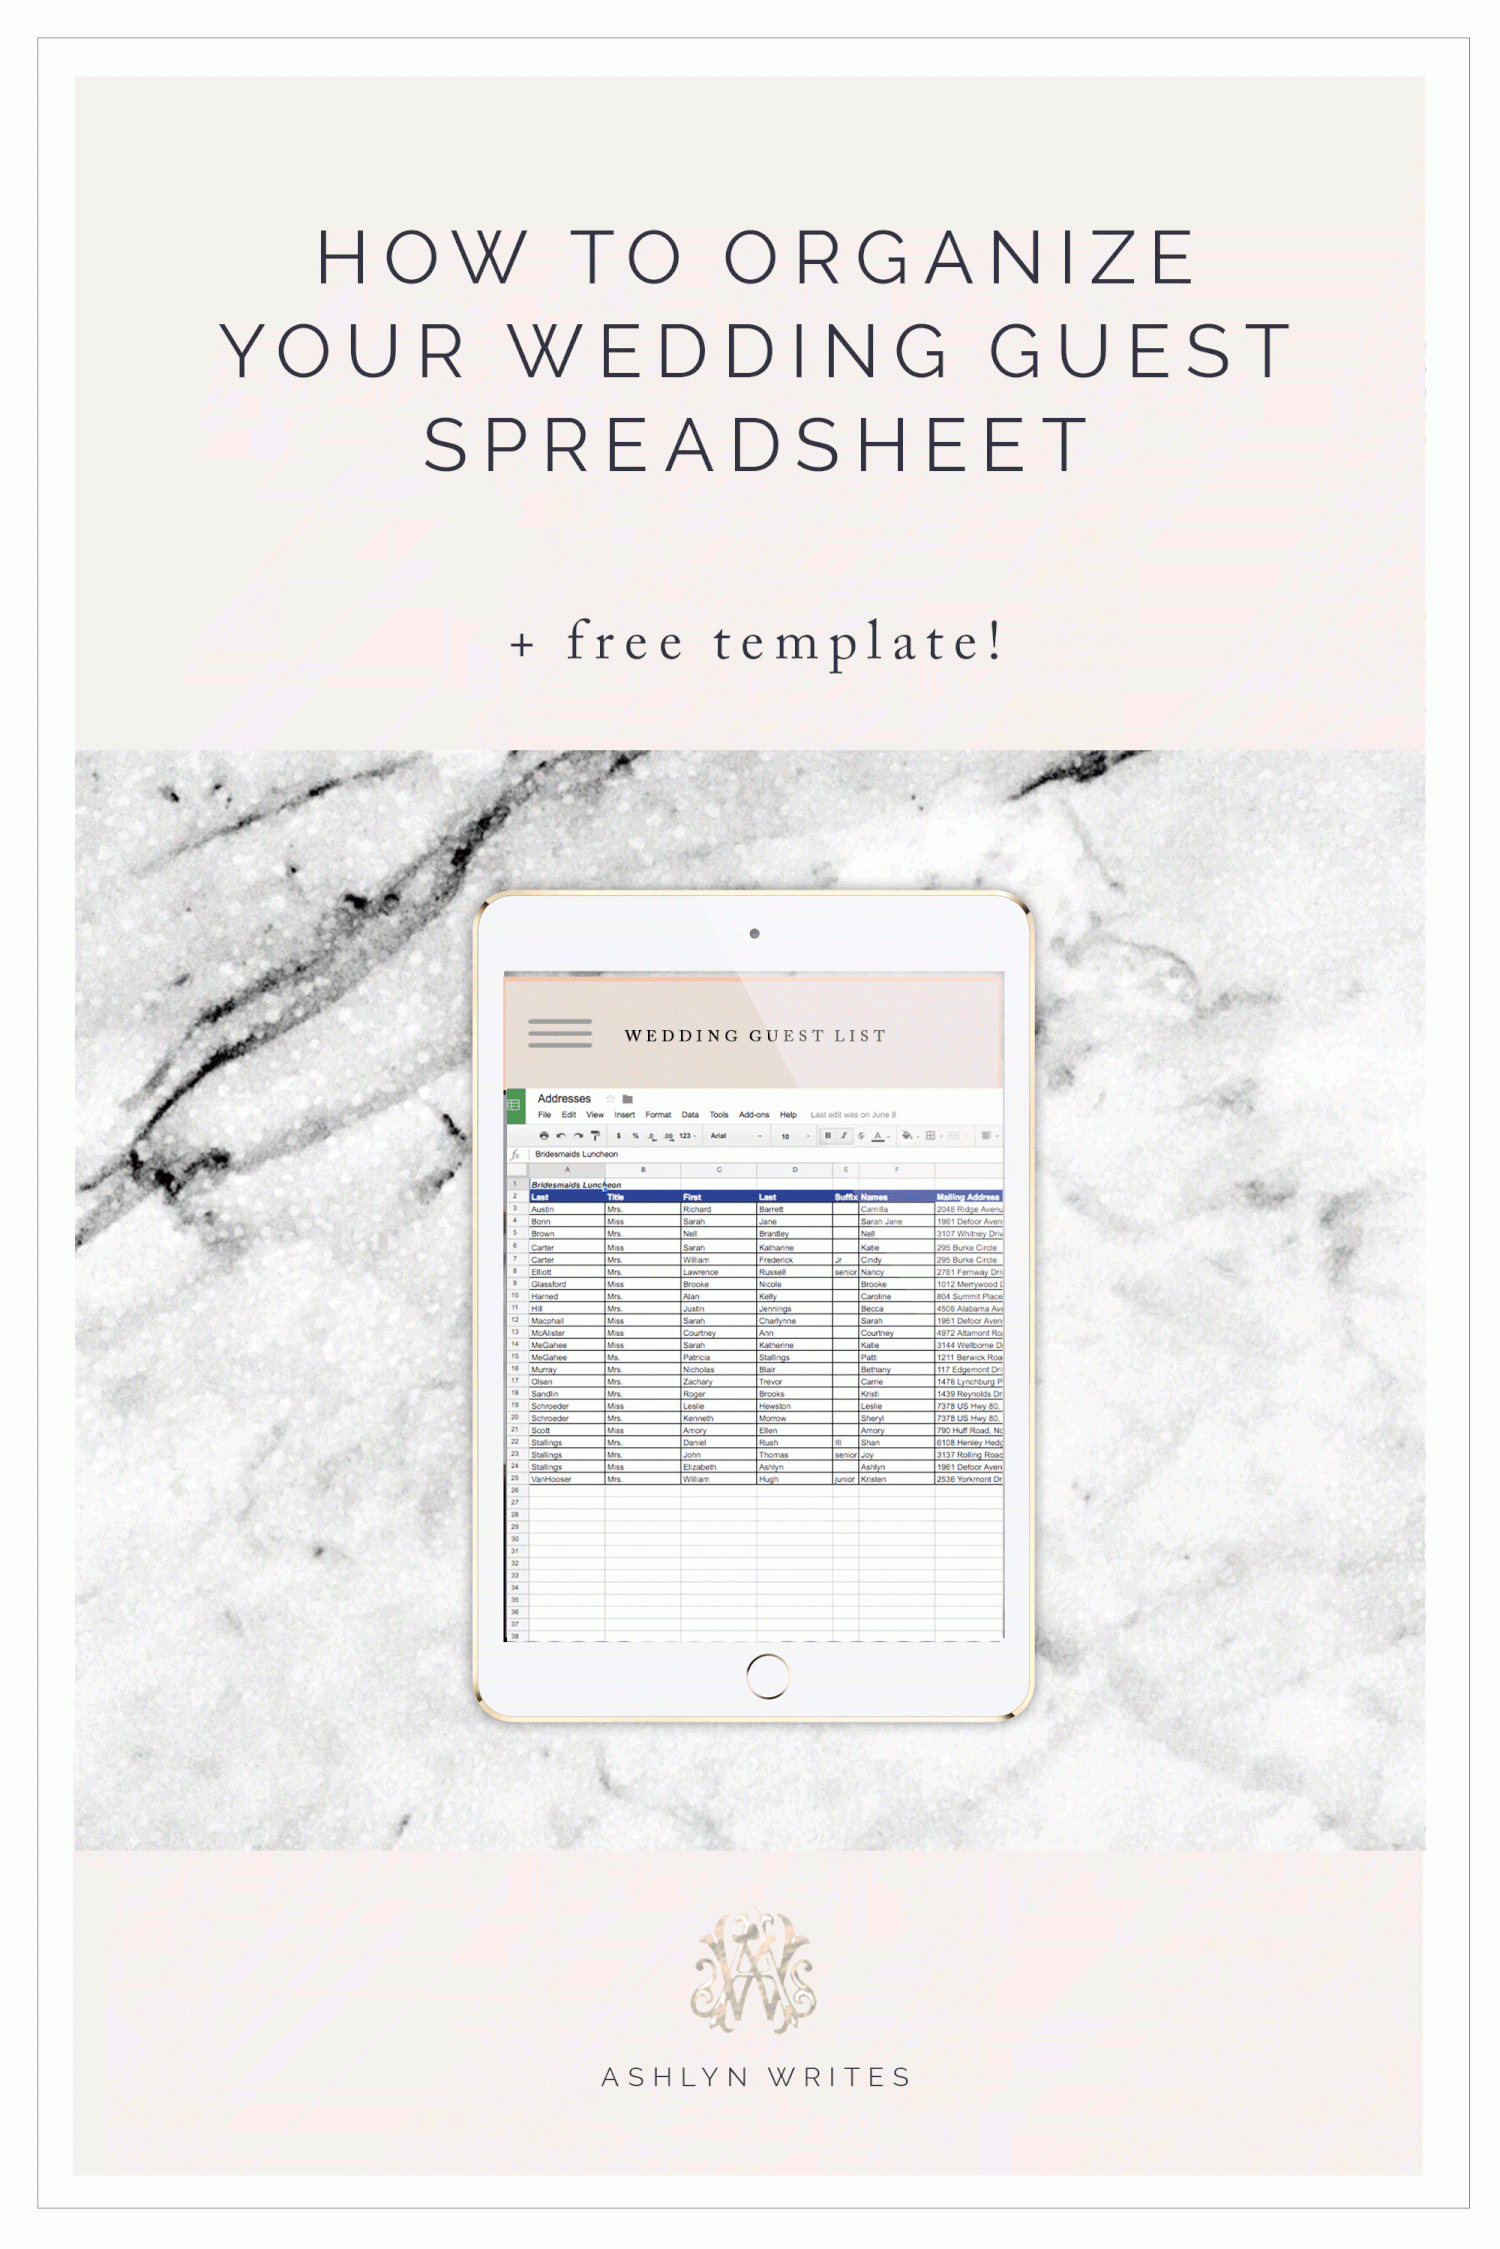 Wedding Guest List Spreadsheet Intended For 7 Free Wedding Guest List Templates And Managers